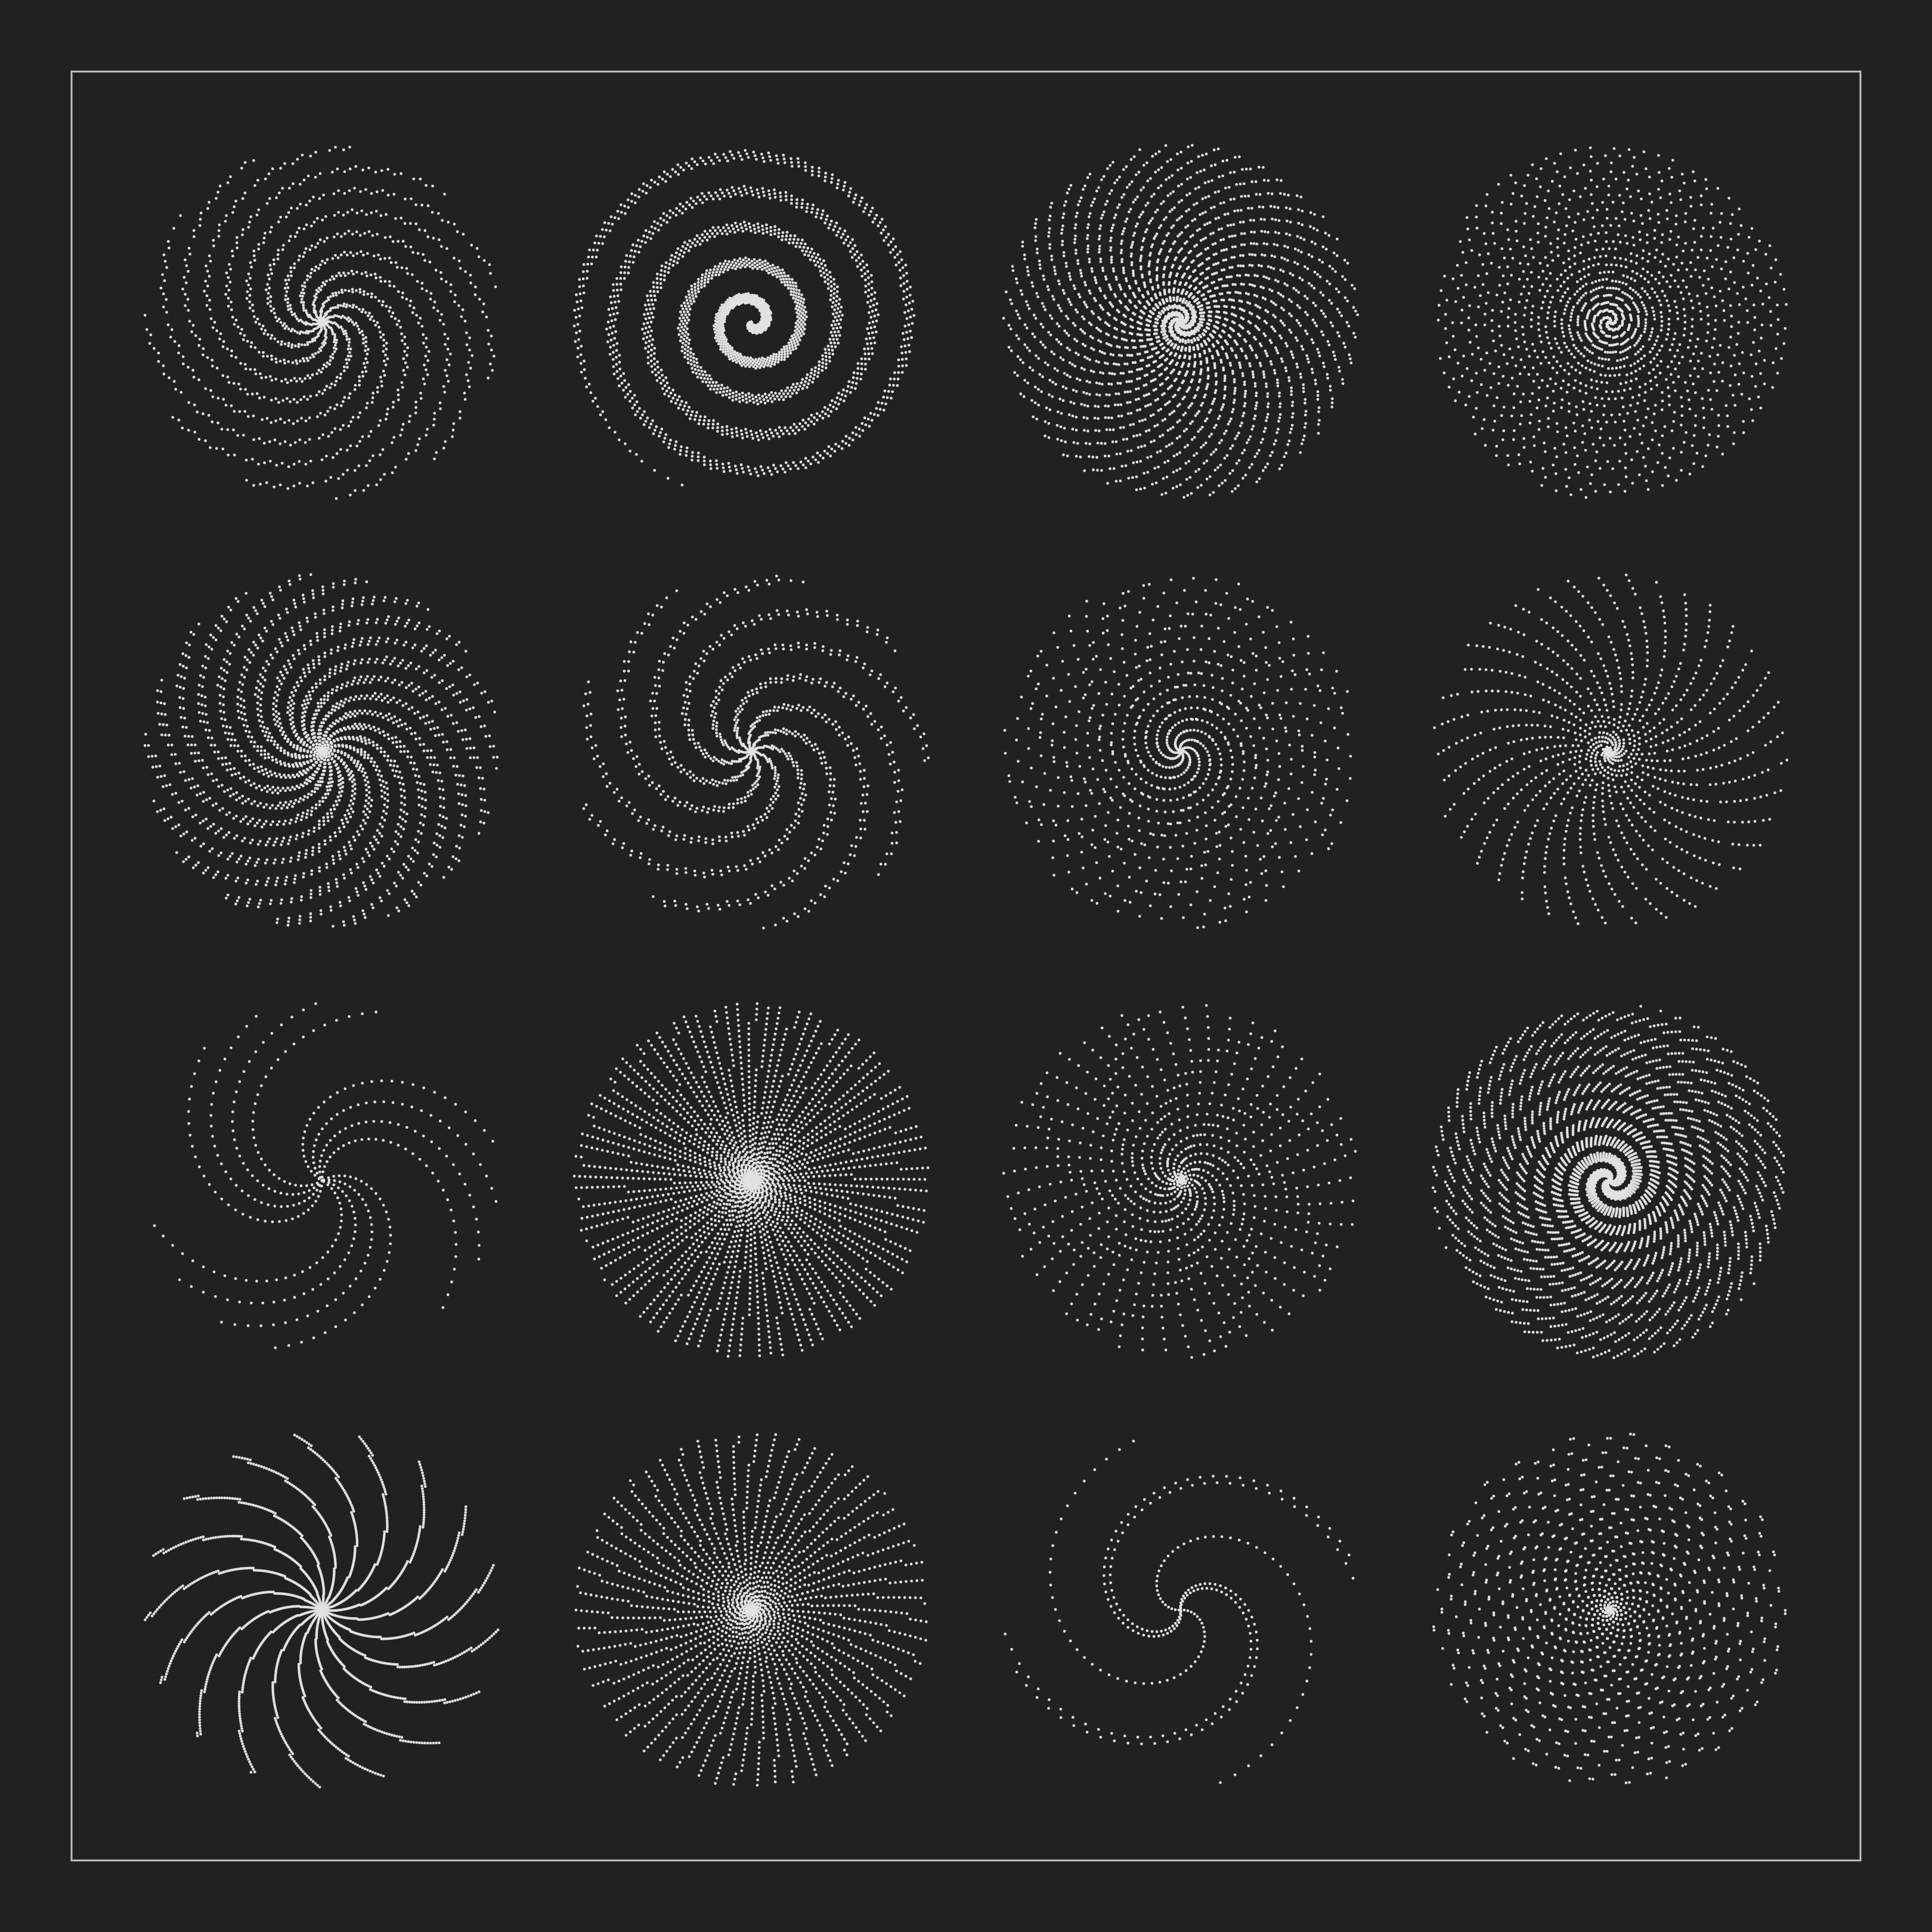 A collection of sixteen unique moon spirals, born out of almost infinite possibilities.